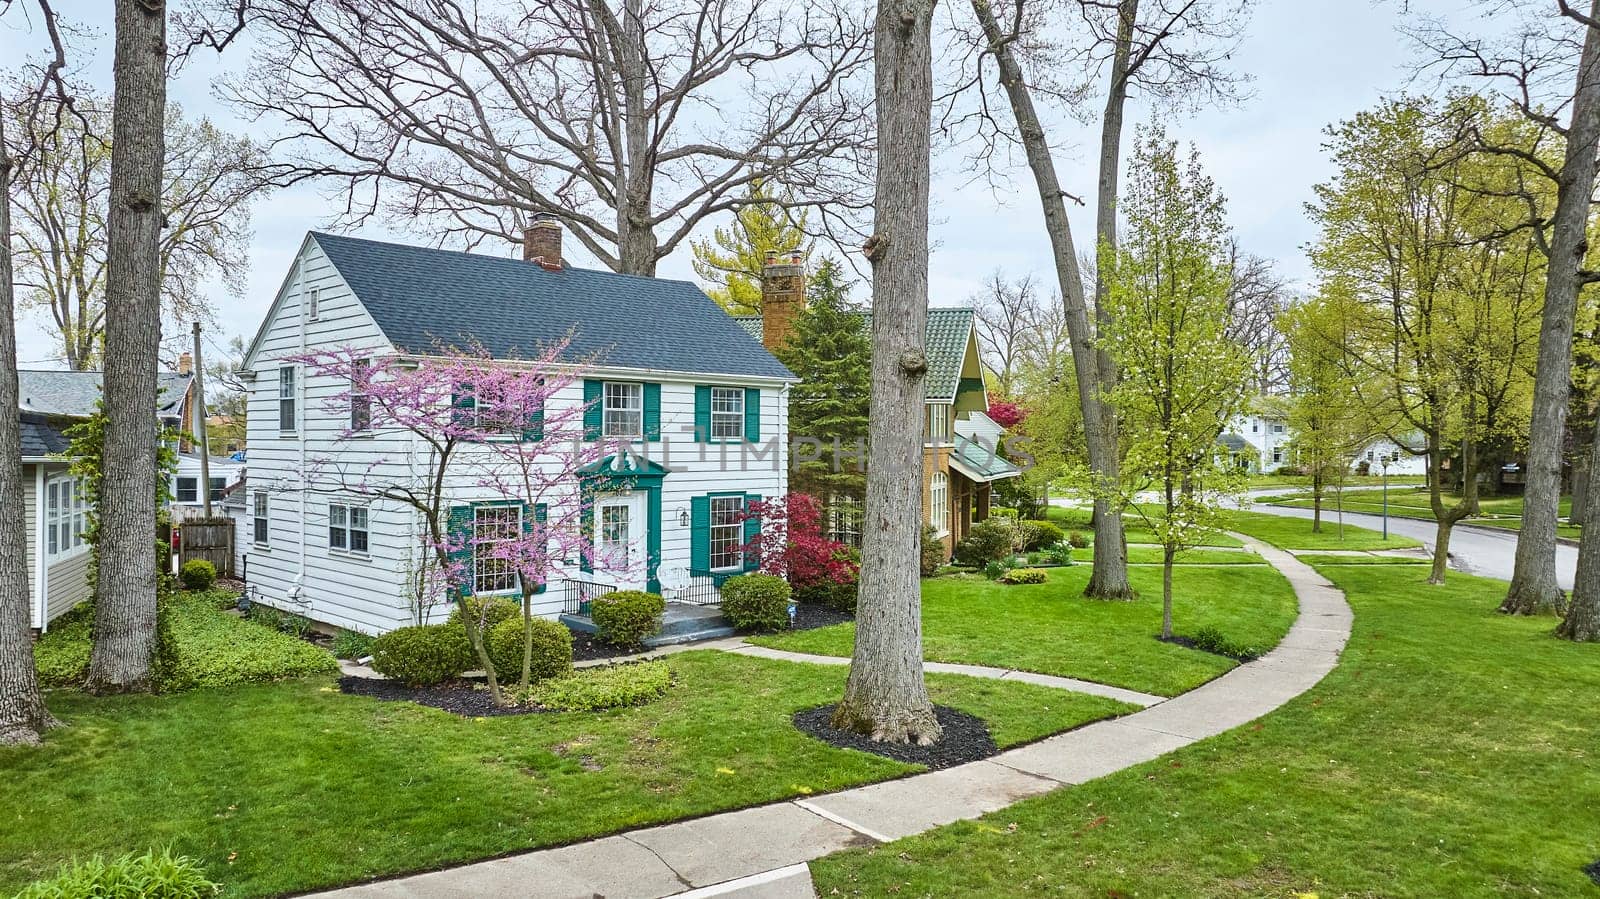 Idyllic Fort Wayne suburb in spring, white house with pink blooms, perfect for real estate showcases.